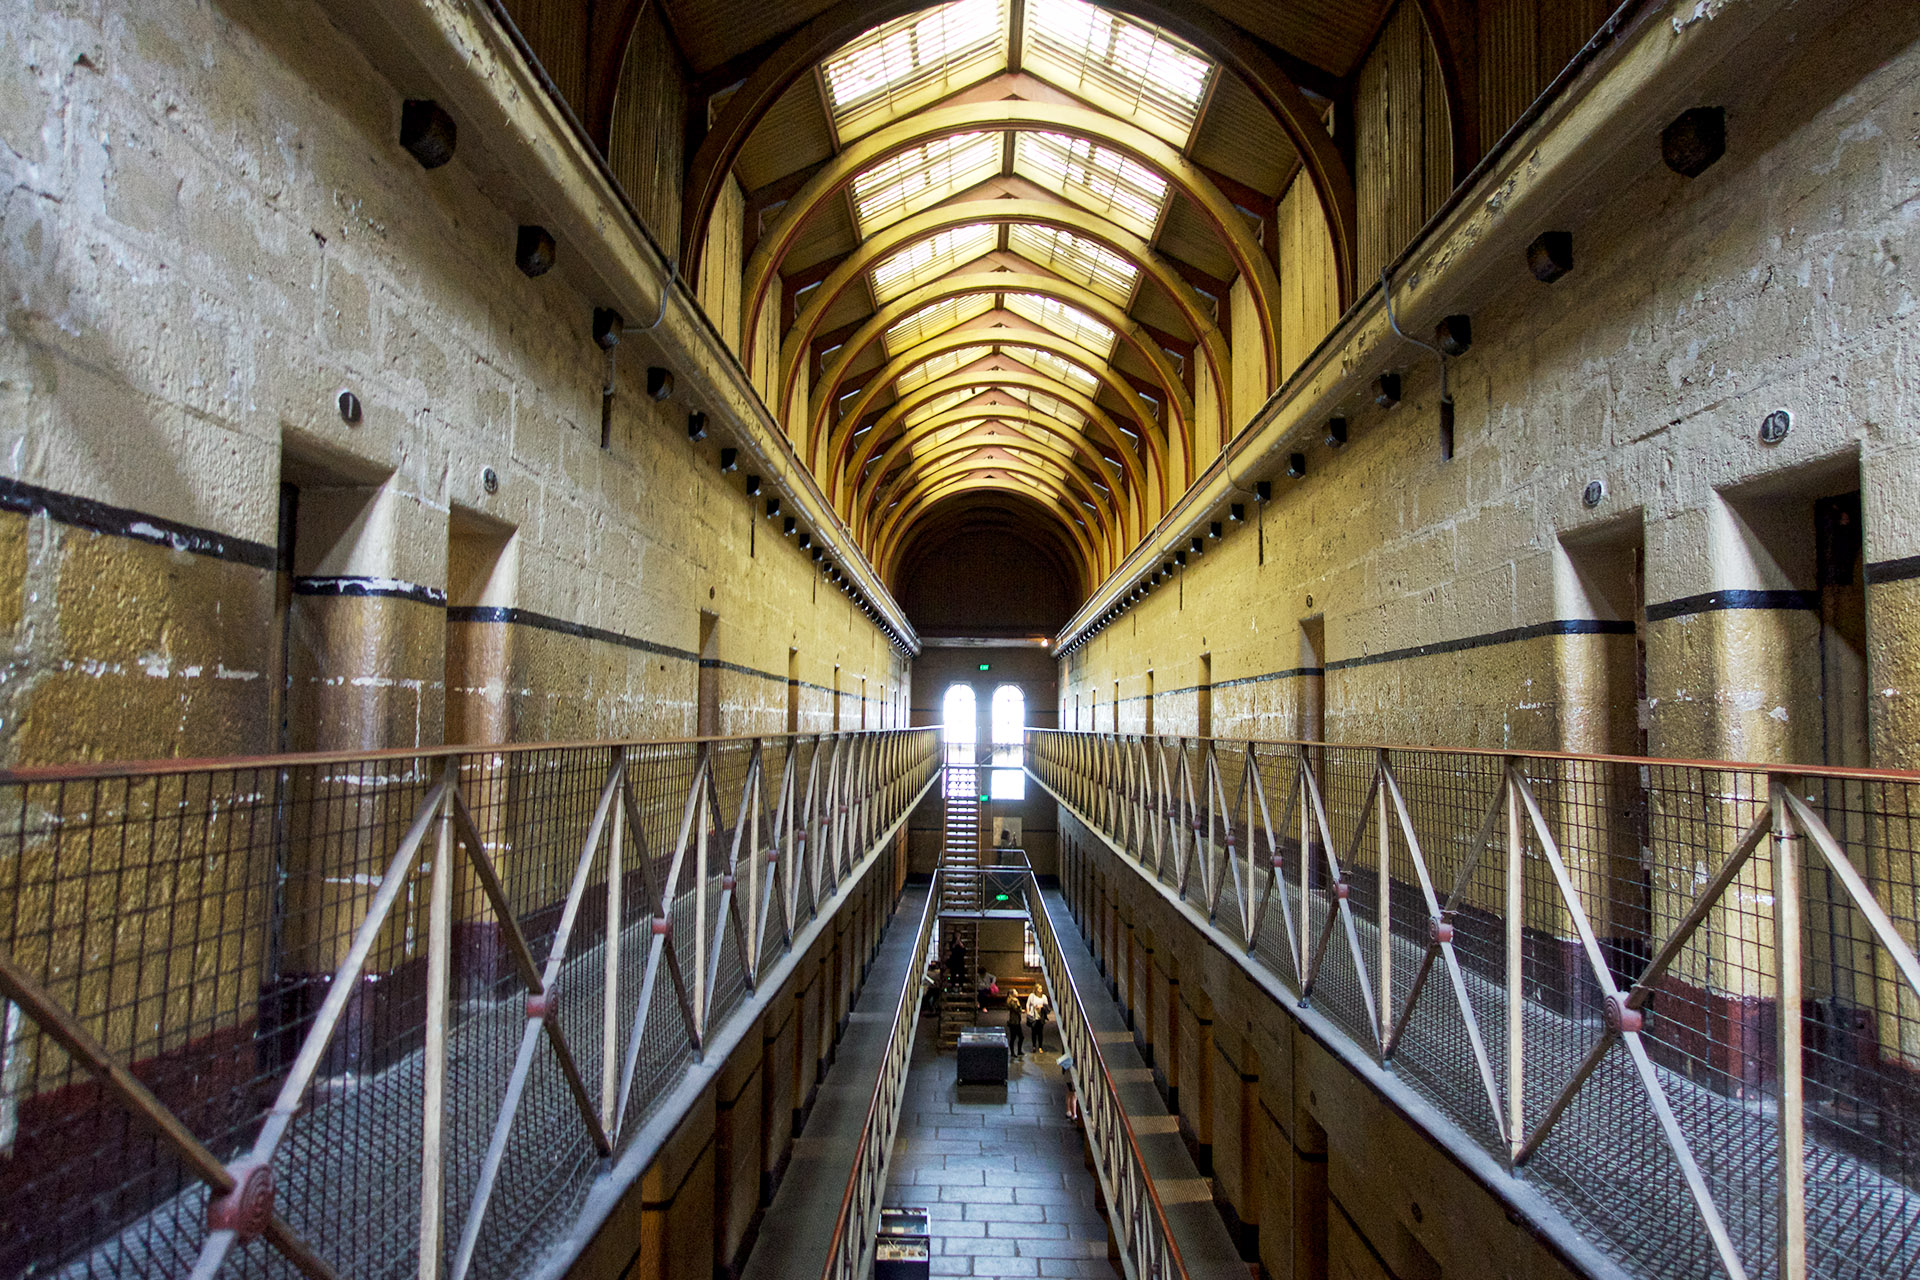 Touring Old Melbourne Gaol